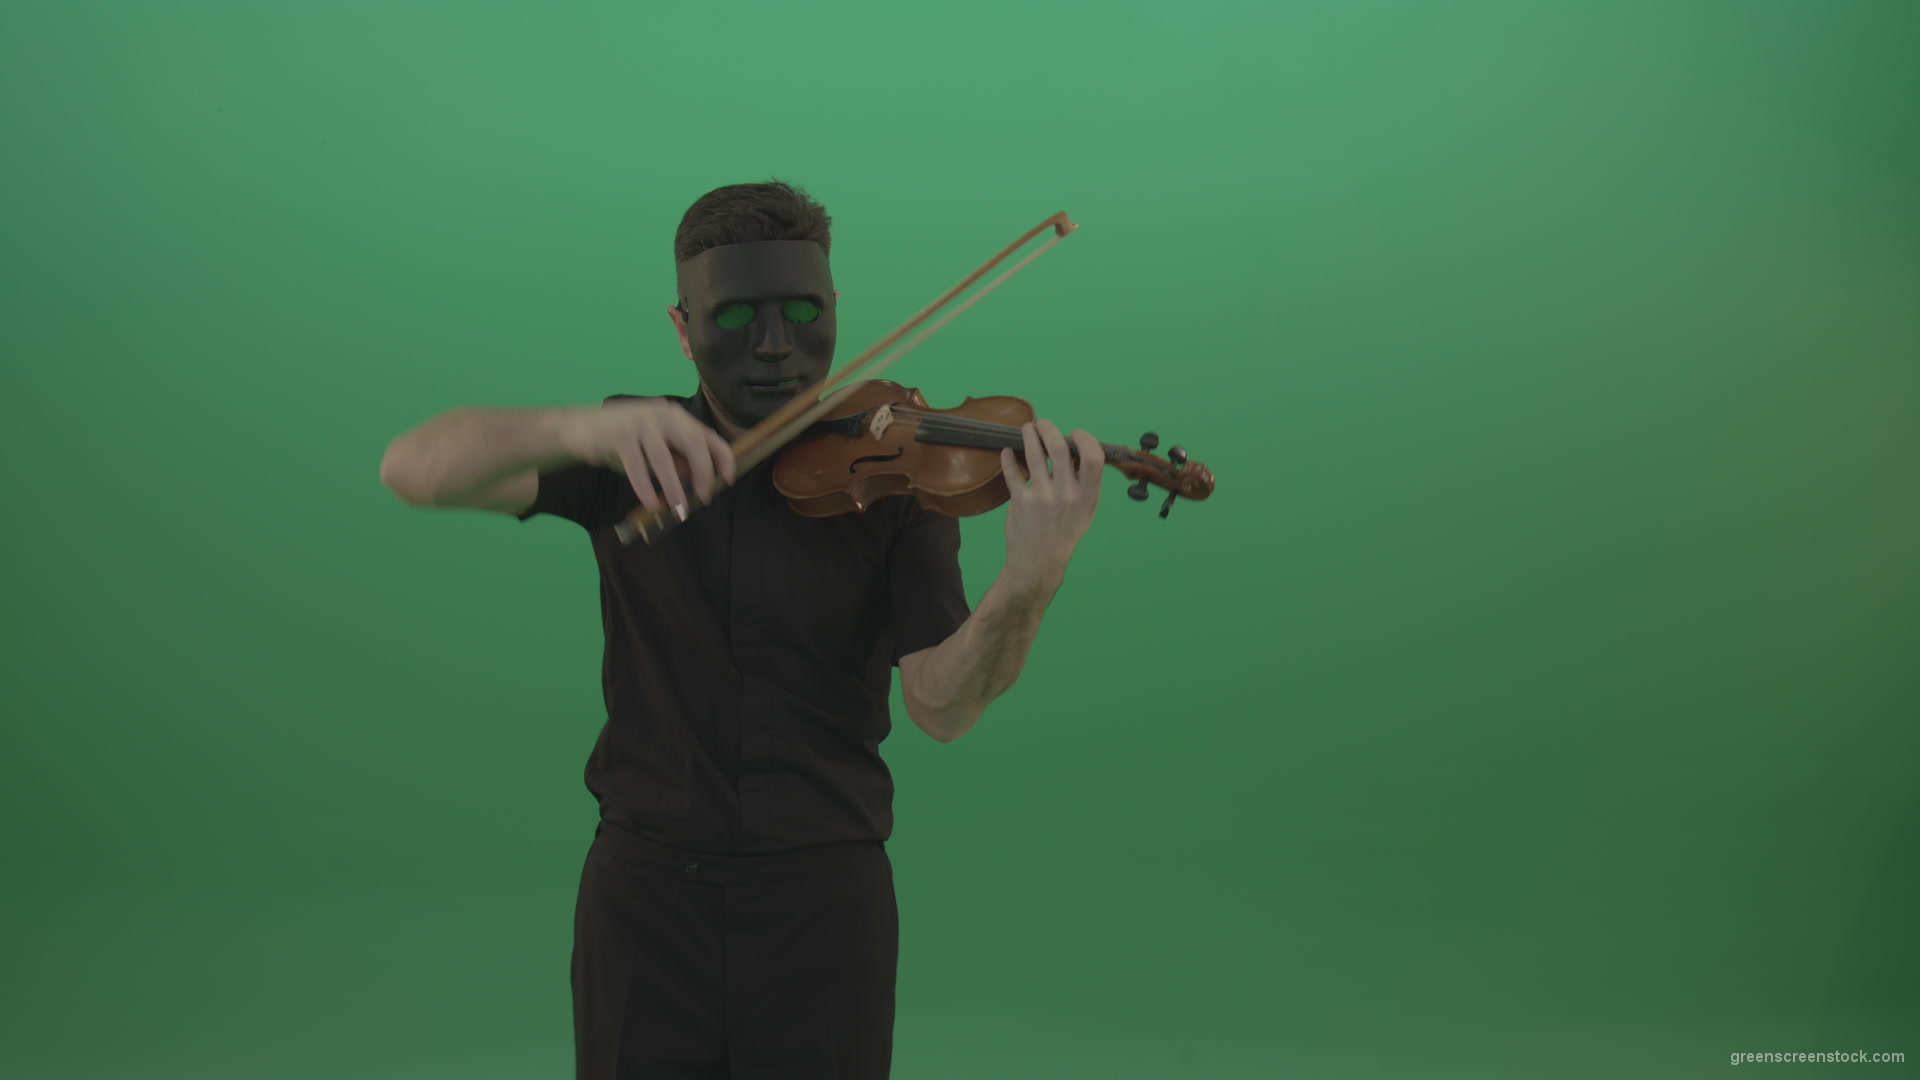 Man-in-black-shirt-and-mask-fast-play-violin-fiddle-strings-gothic-music-isolated-on-green-screen_007 Green Screen Stock